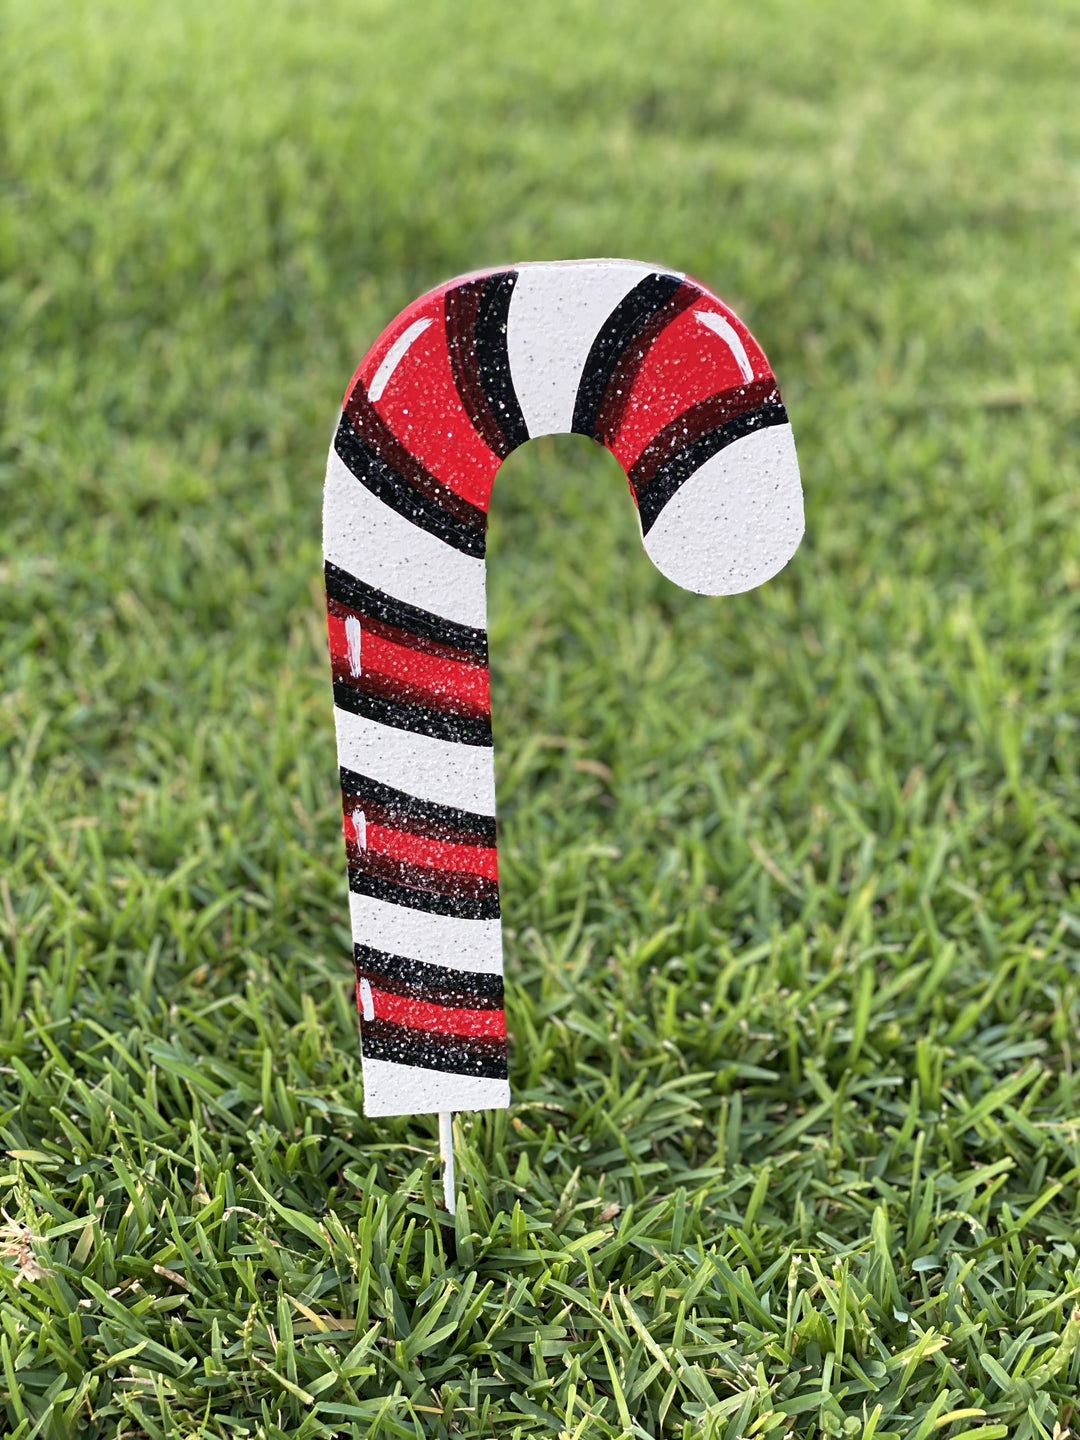 Christmas Candy cane facing right painted yard art design